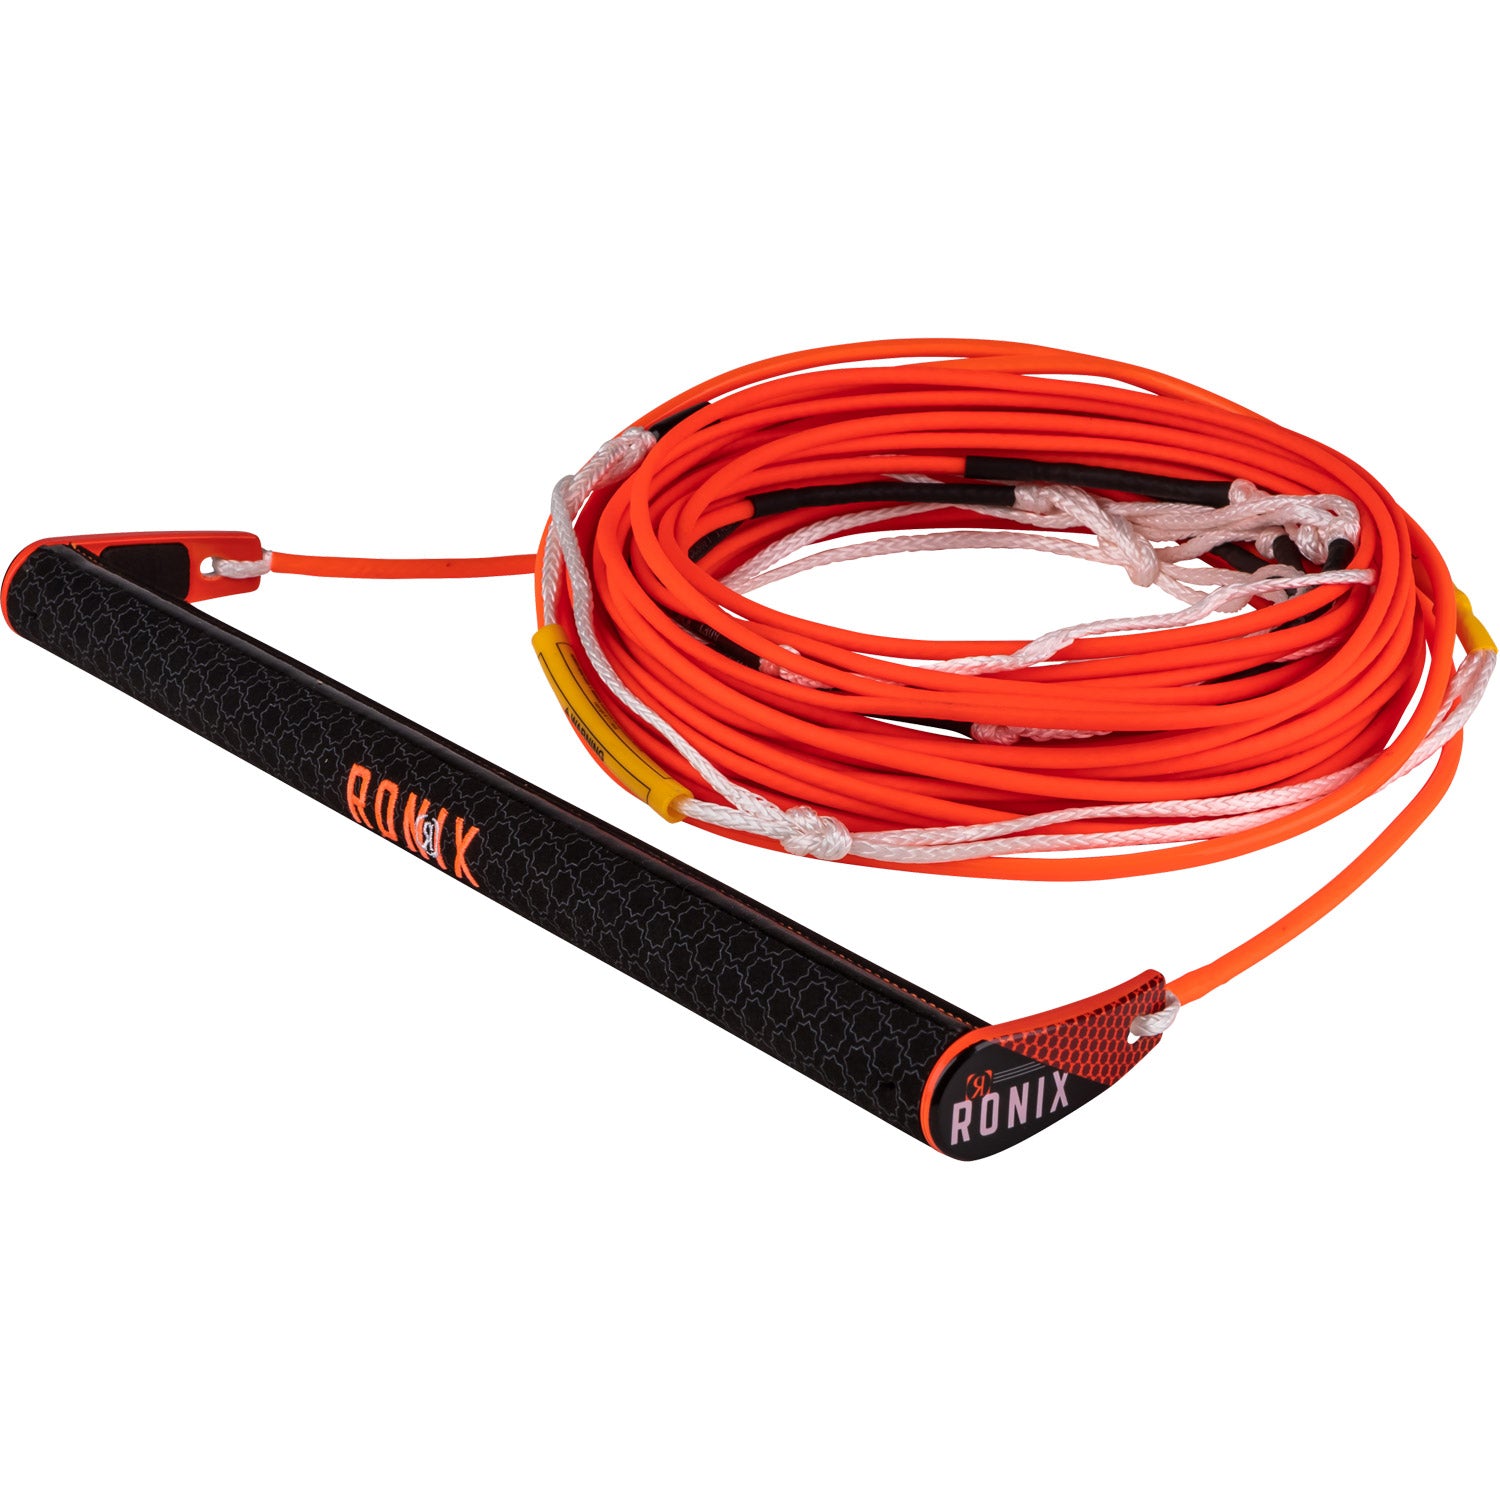 Combo 6.0 Wakeboard Rope Package